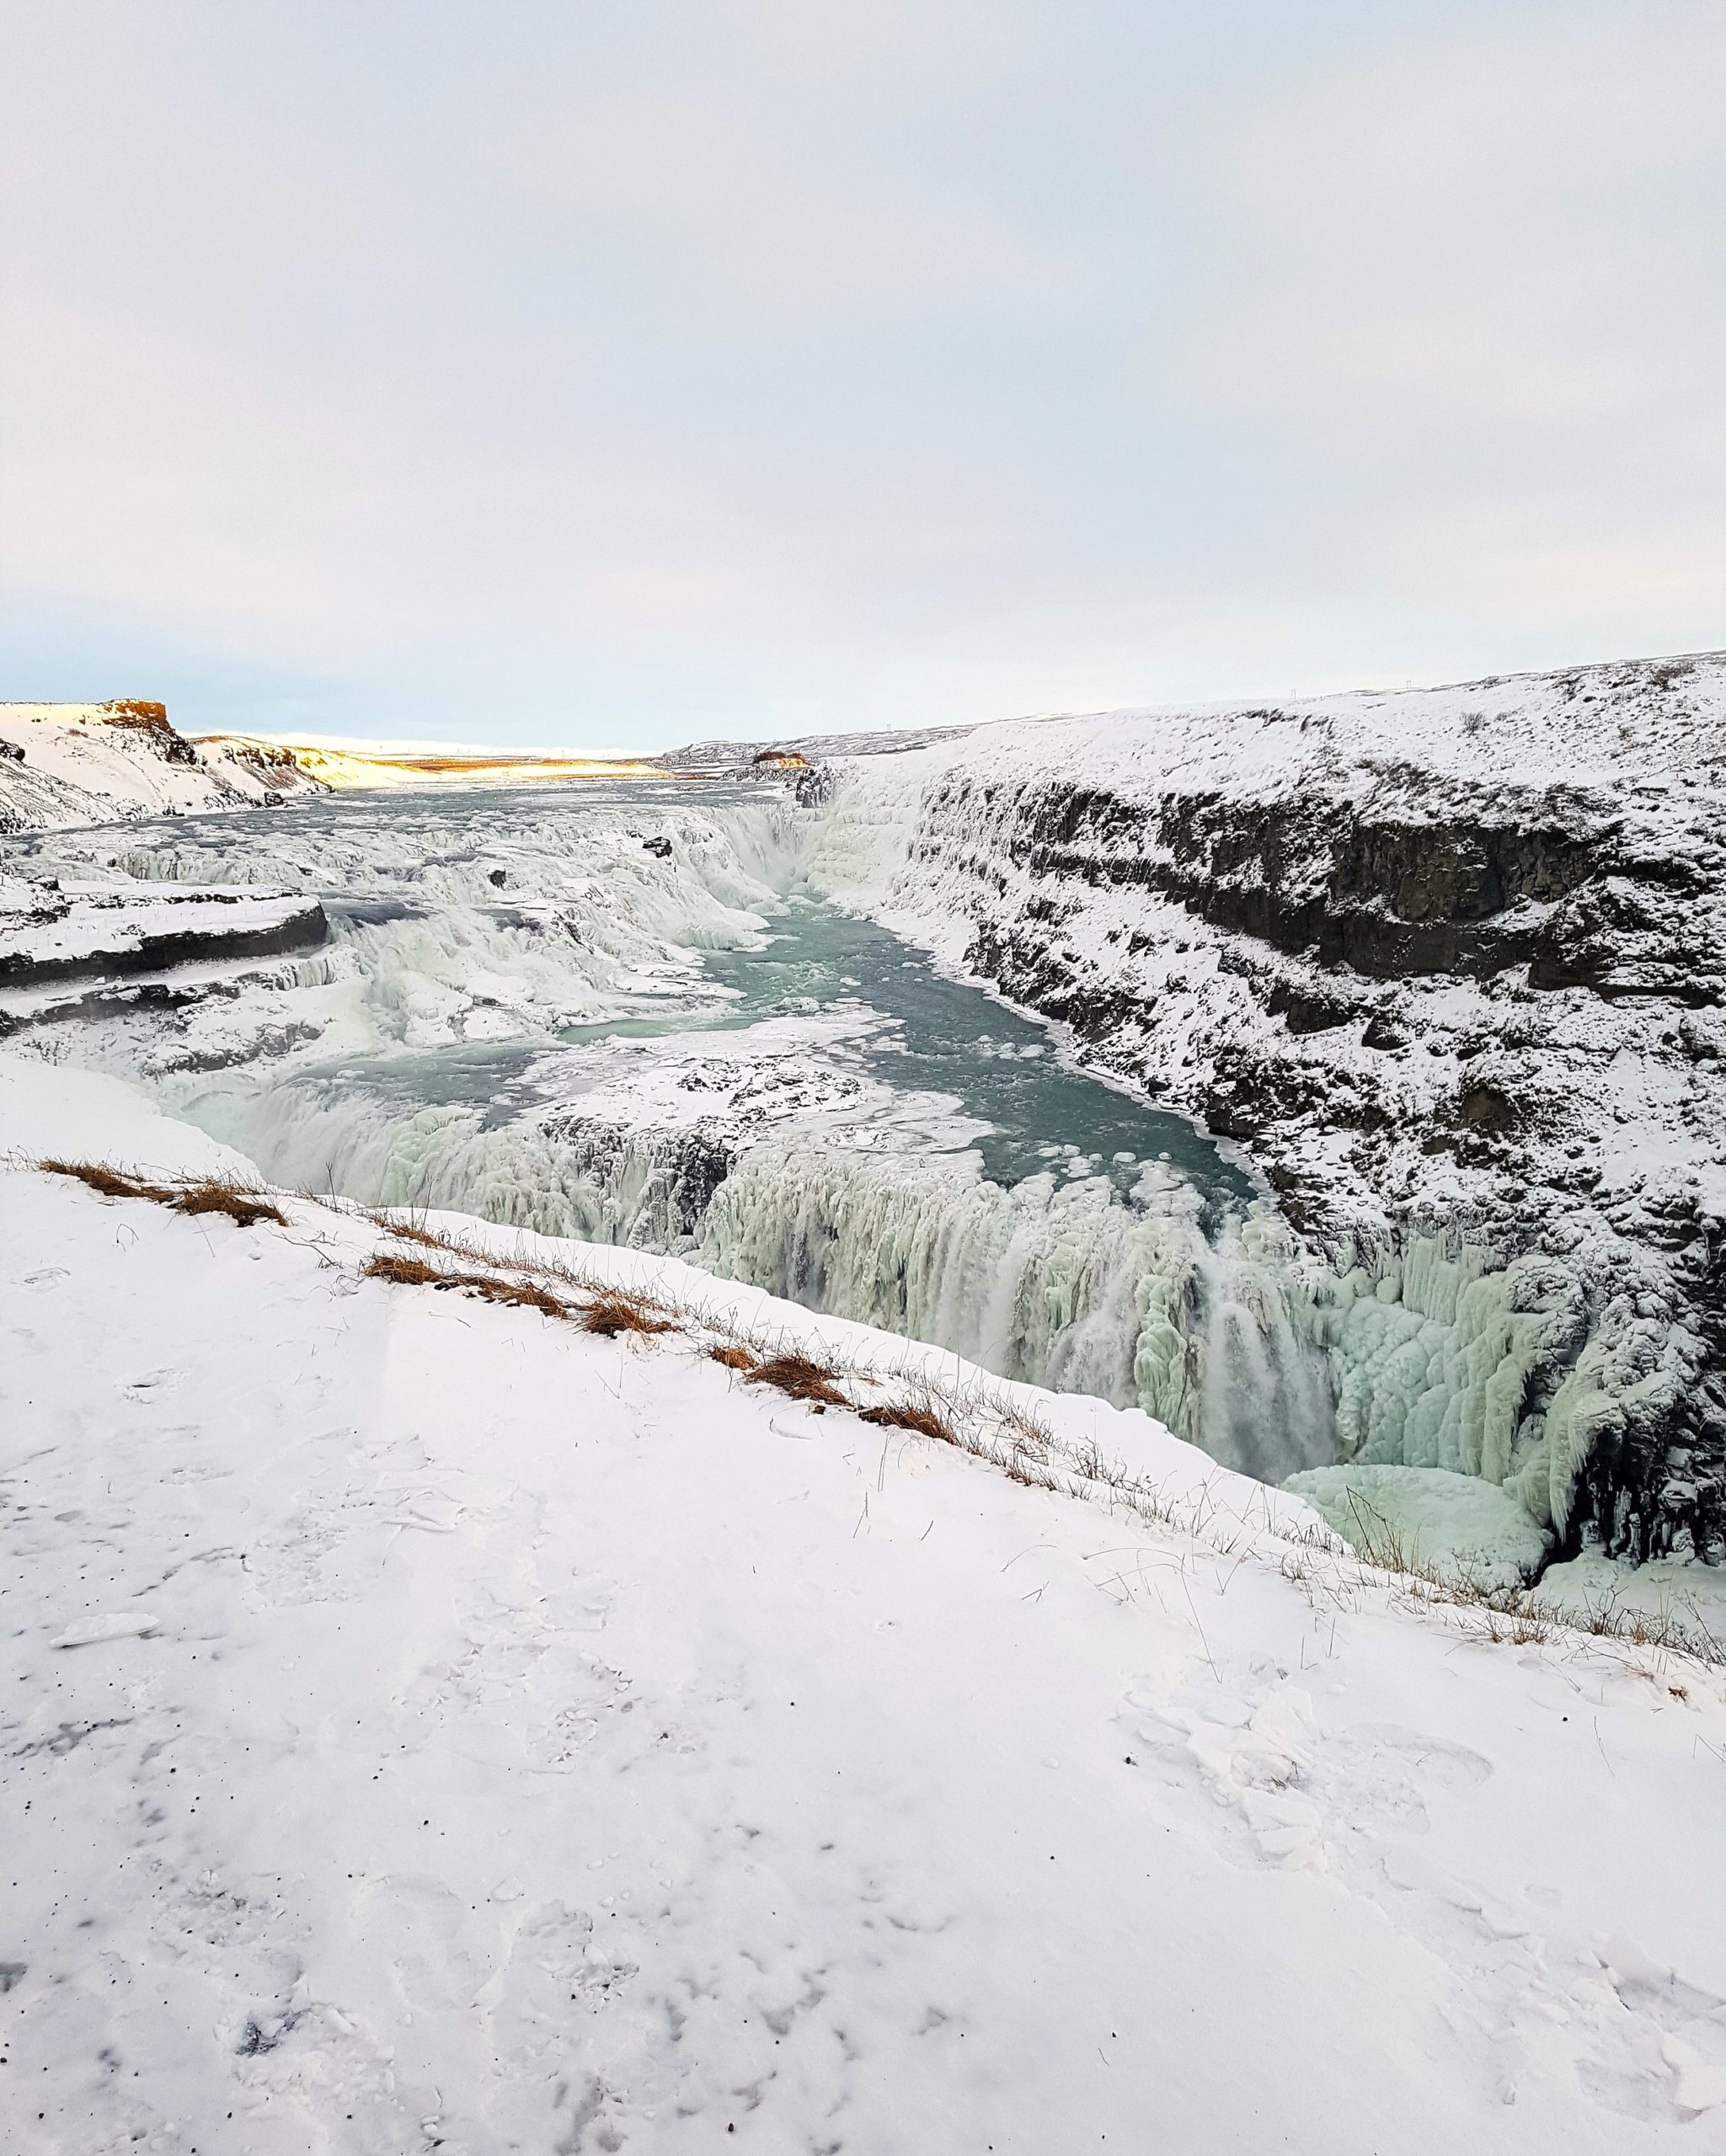 The frozen waters of Gullfoss shine in the golden light of sunset.